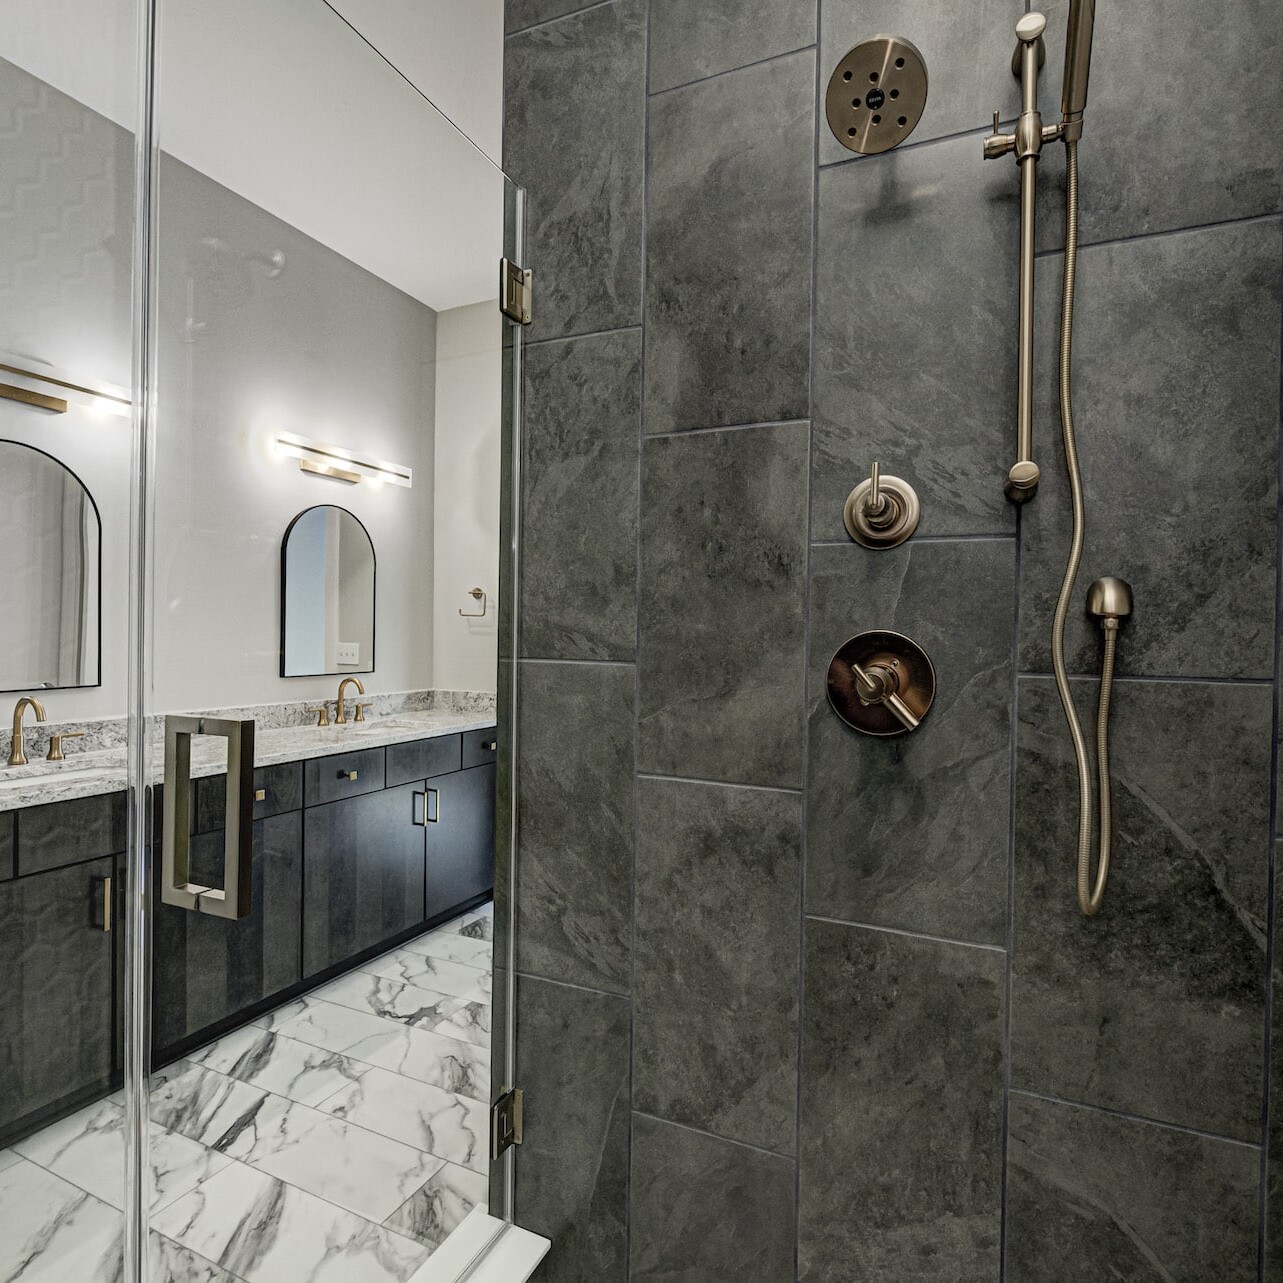 A modern bathroom with a marble shower stall in a custom home.